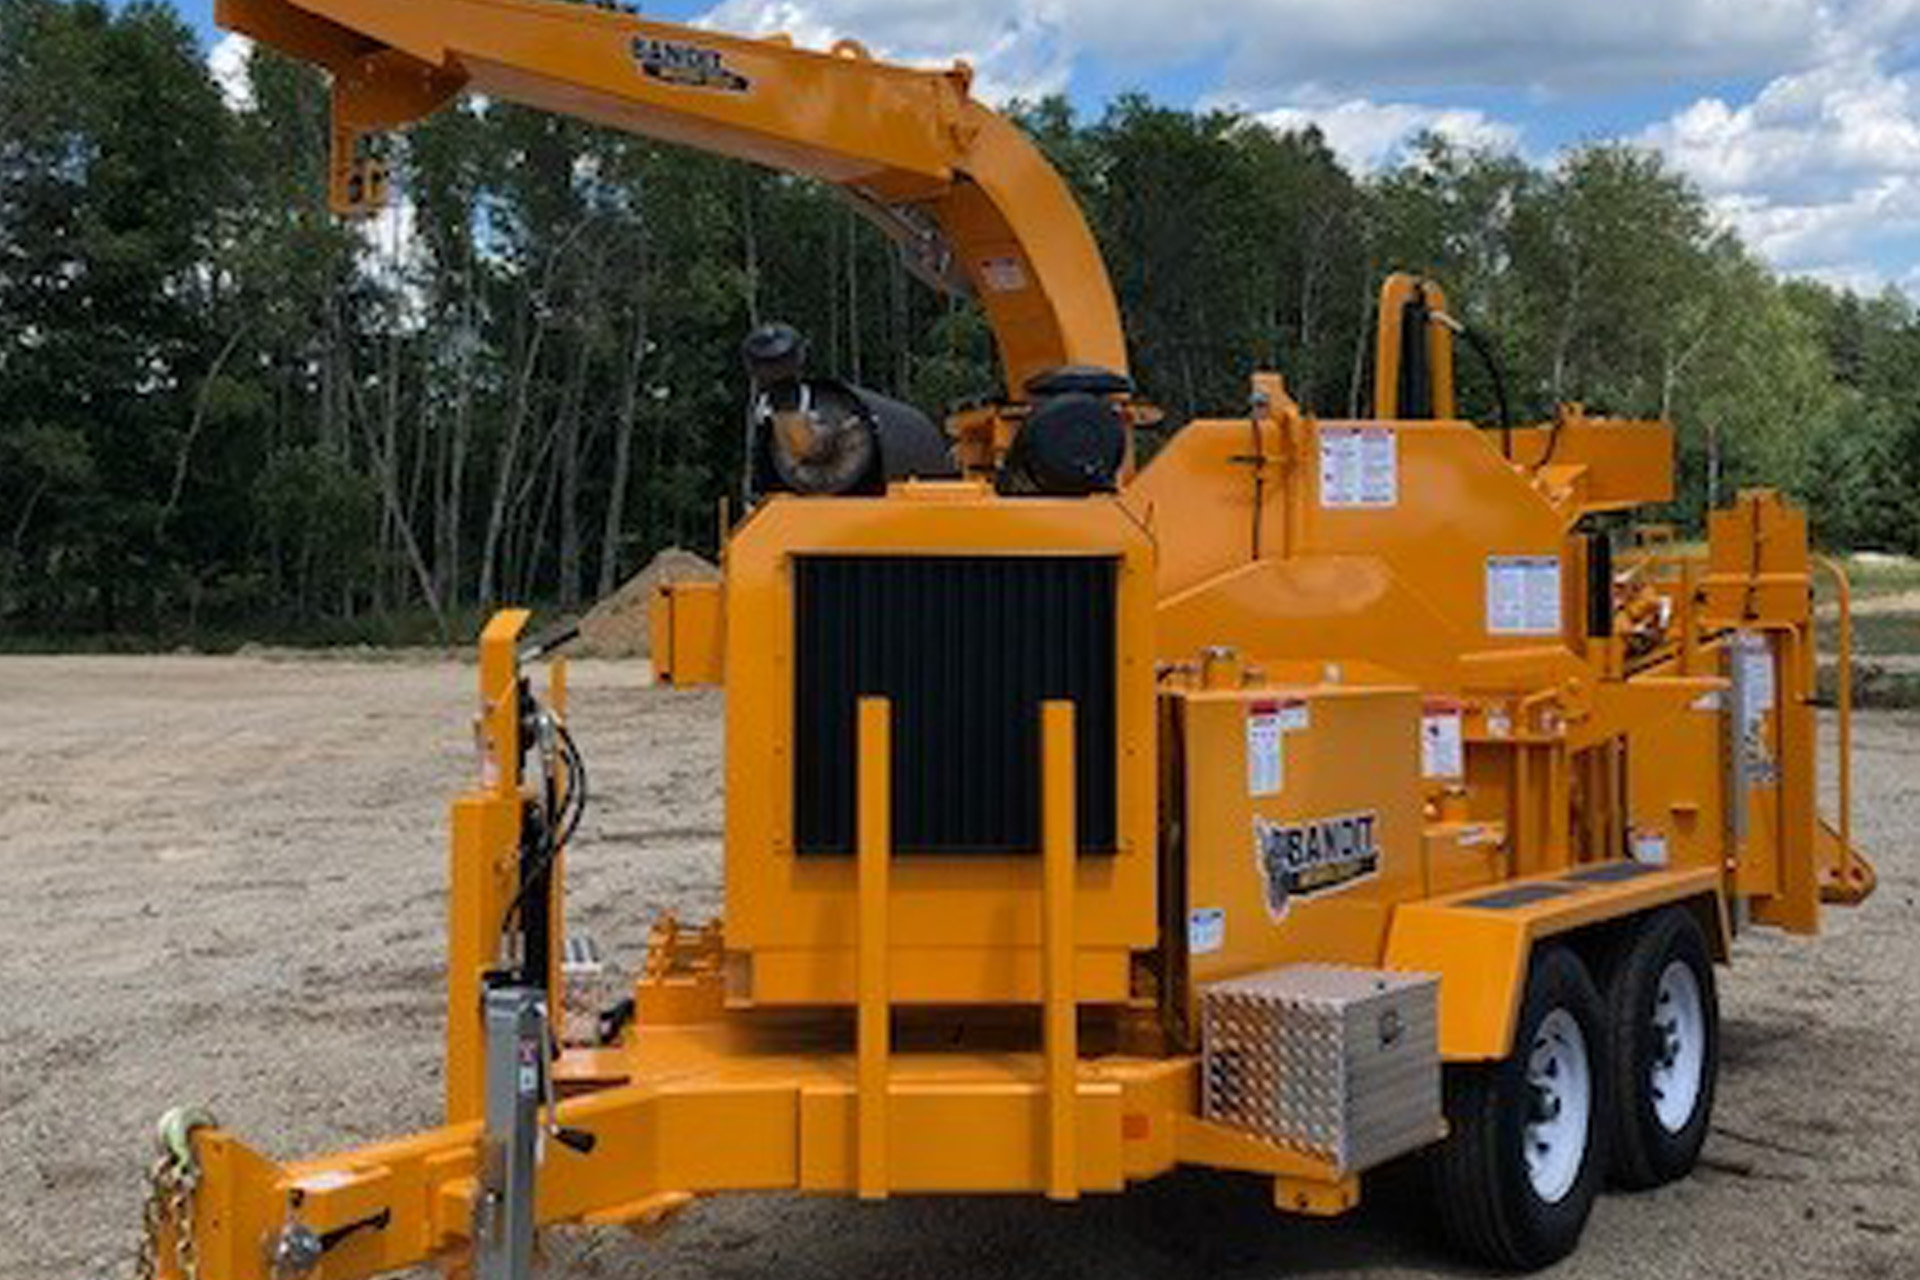 Bandit Hand-Fed Wood Chipper 280XP Iron Source in Delaware